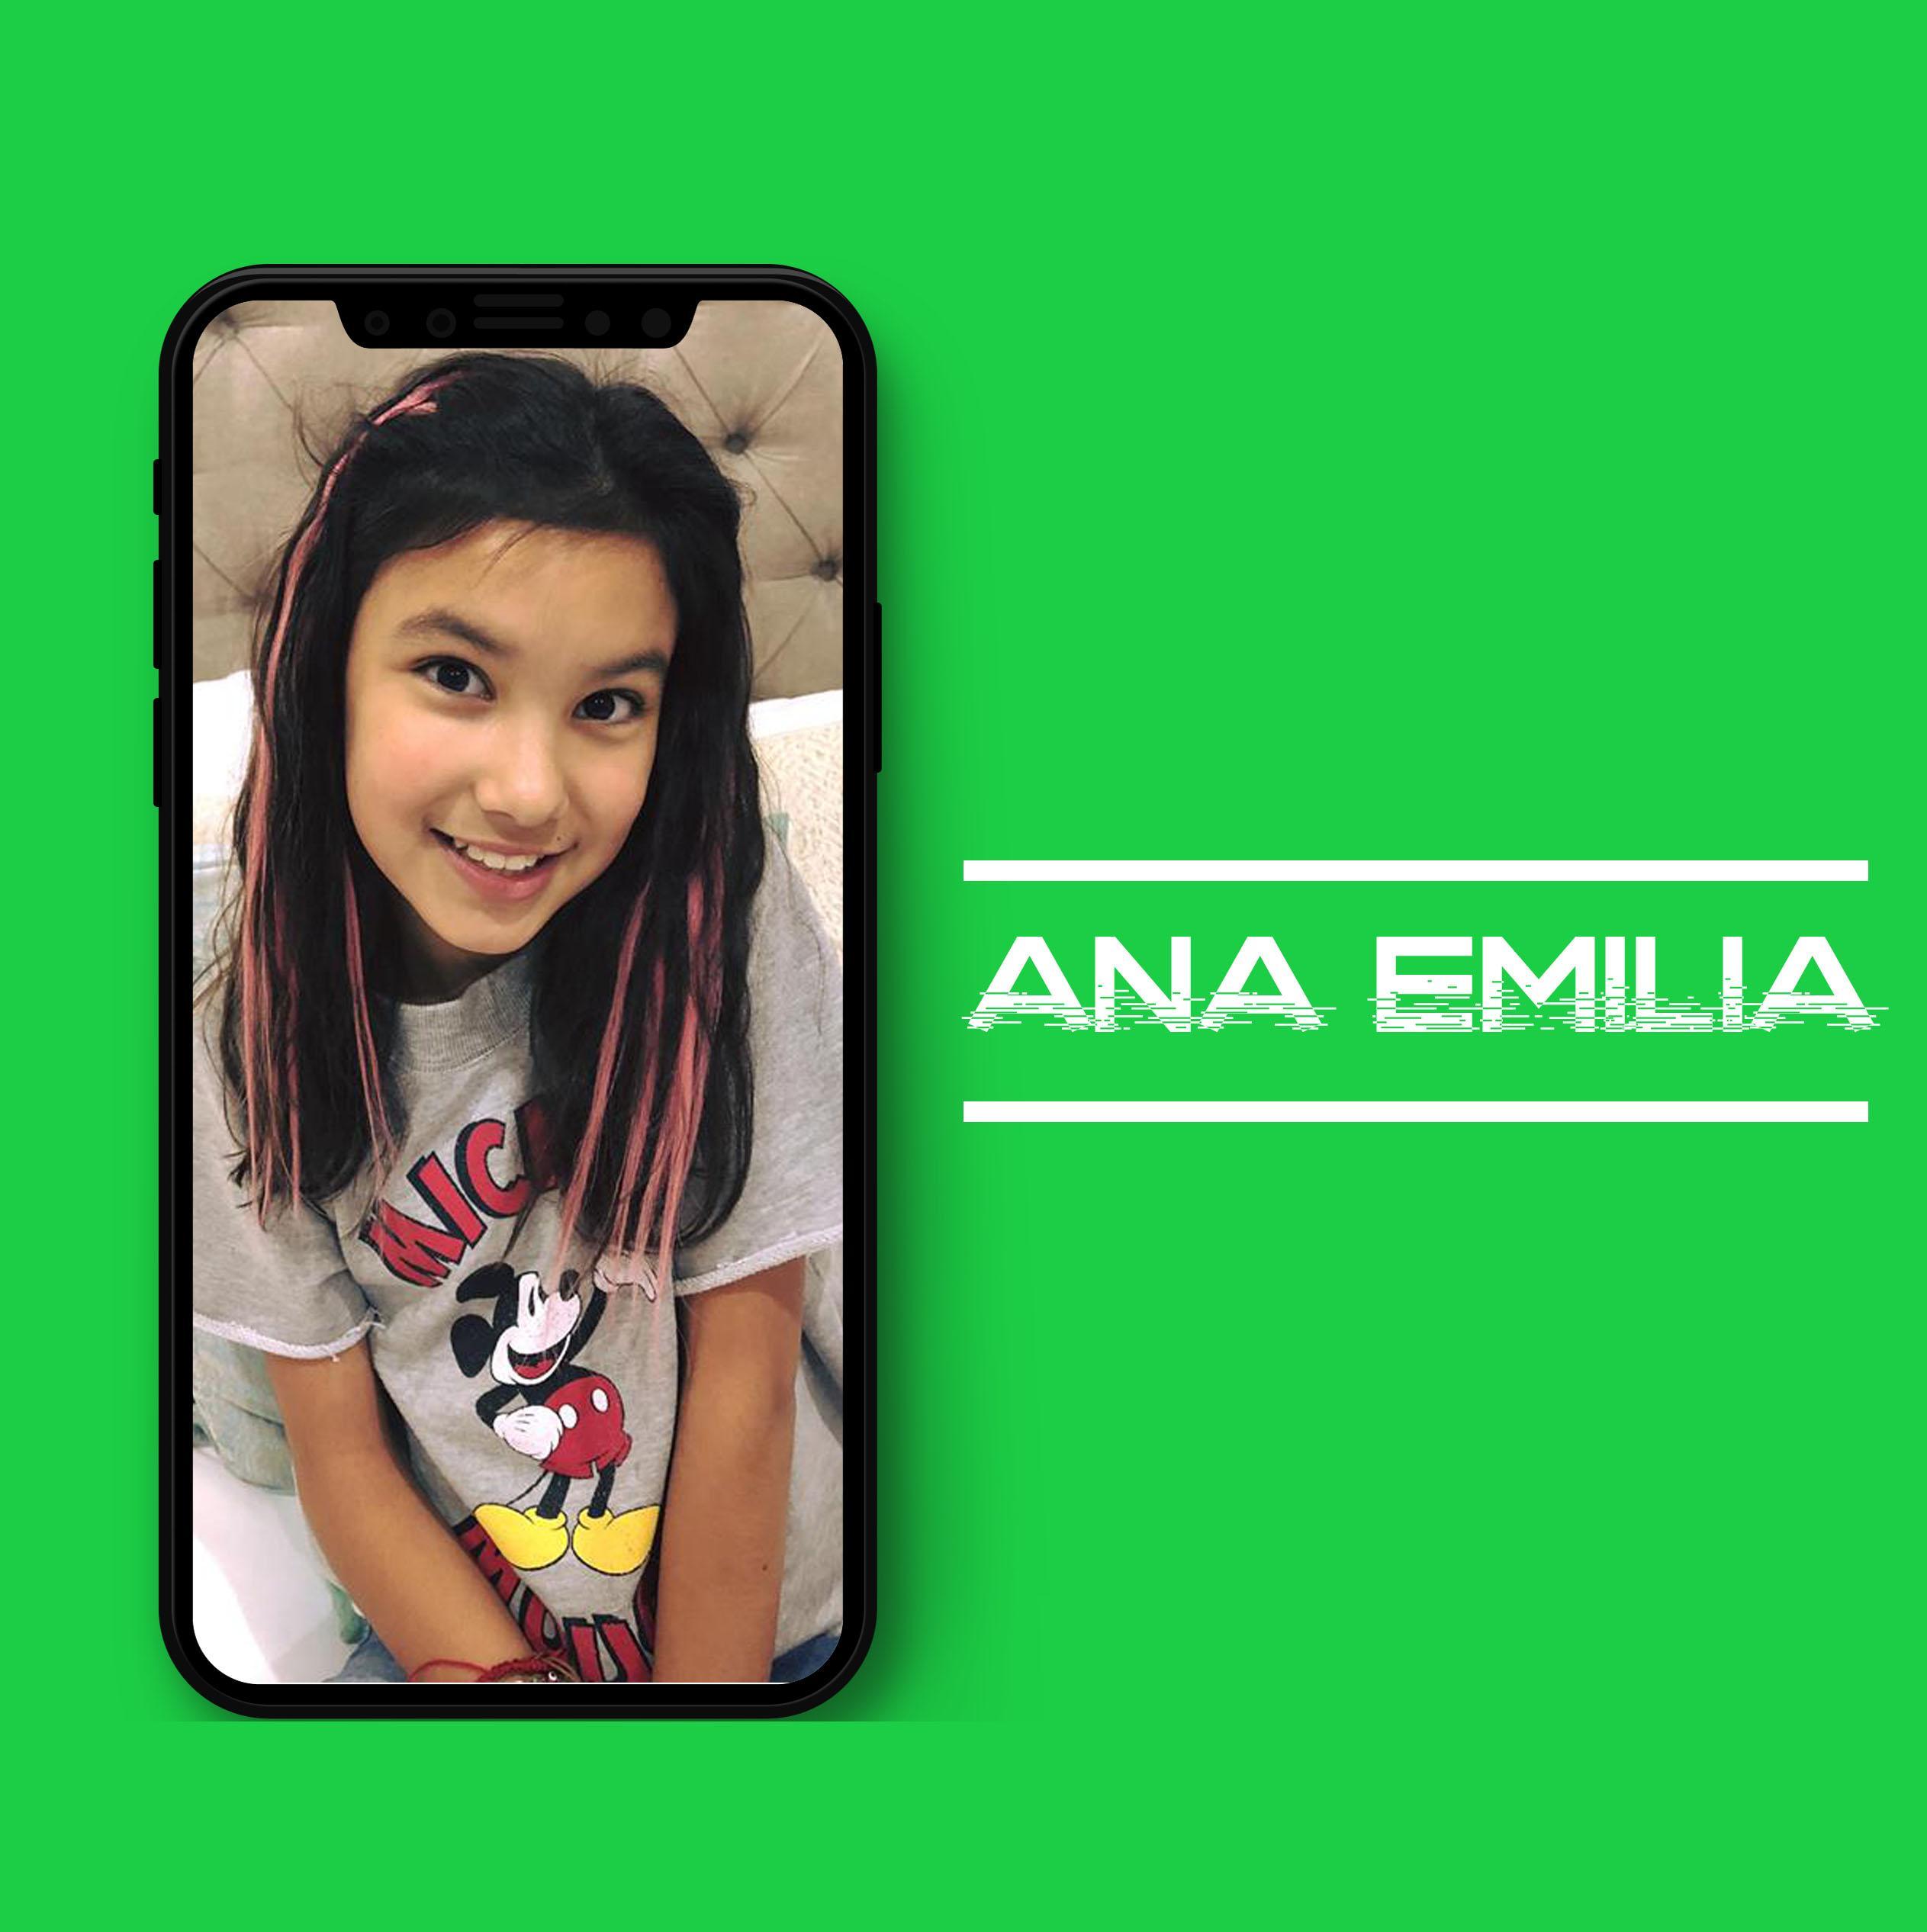 Ana Emilia Wallpaper Hd 4k For Android Apk Download